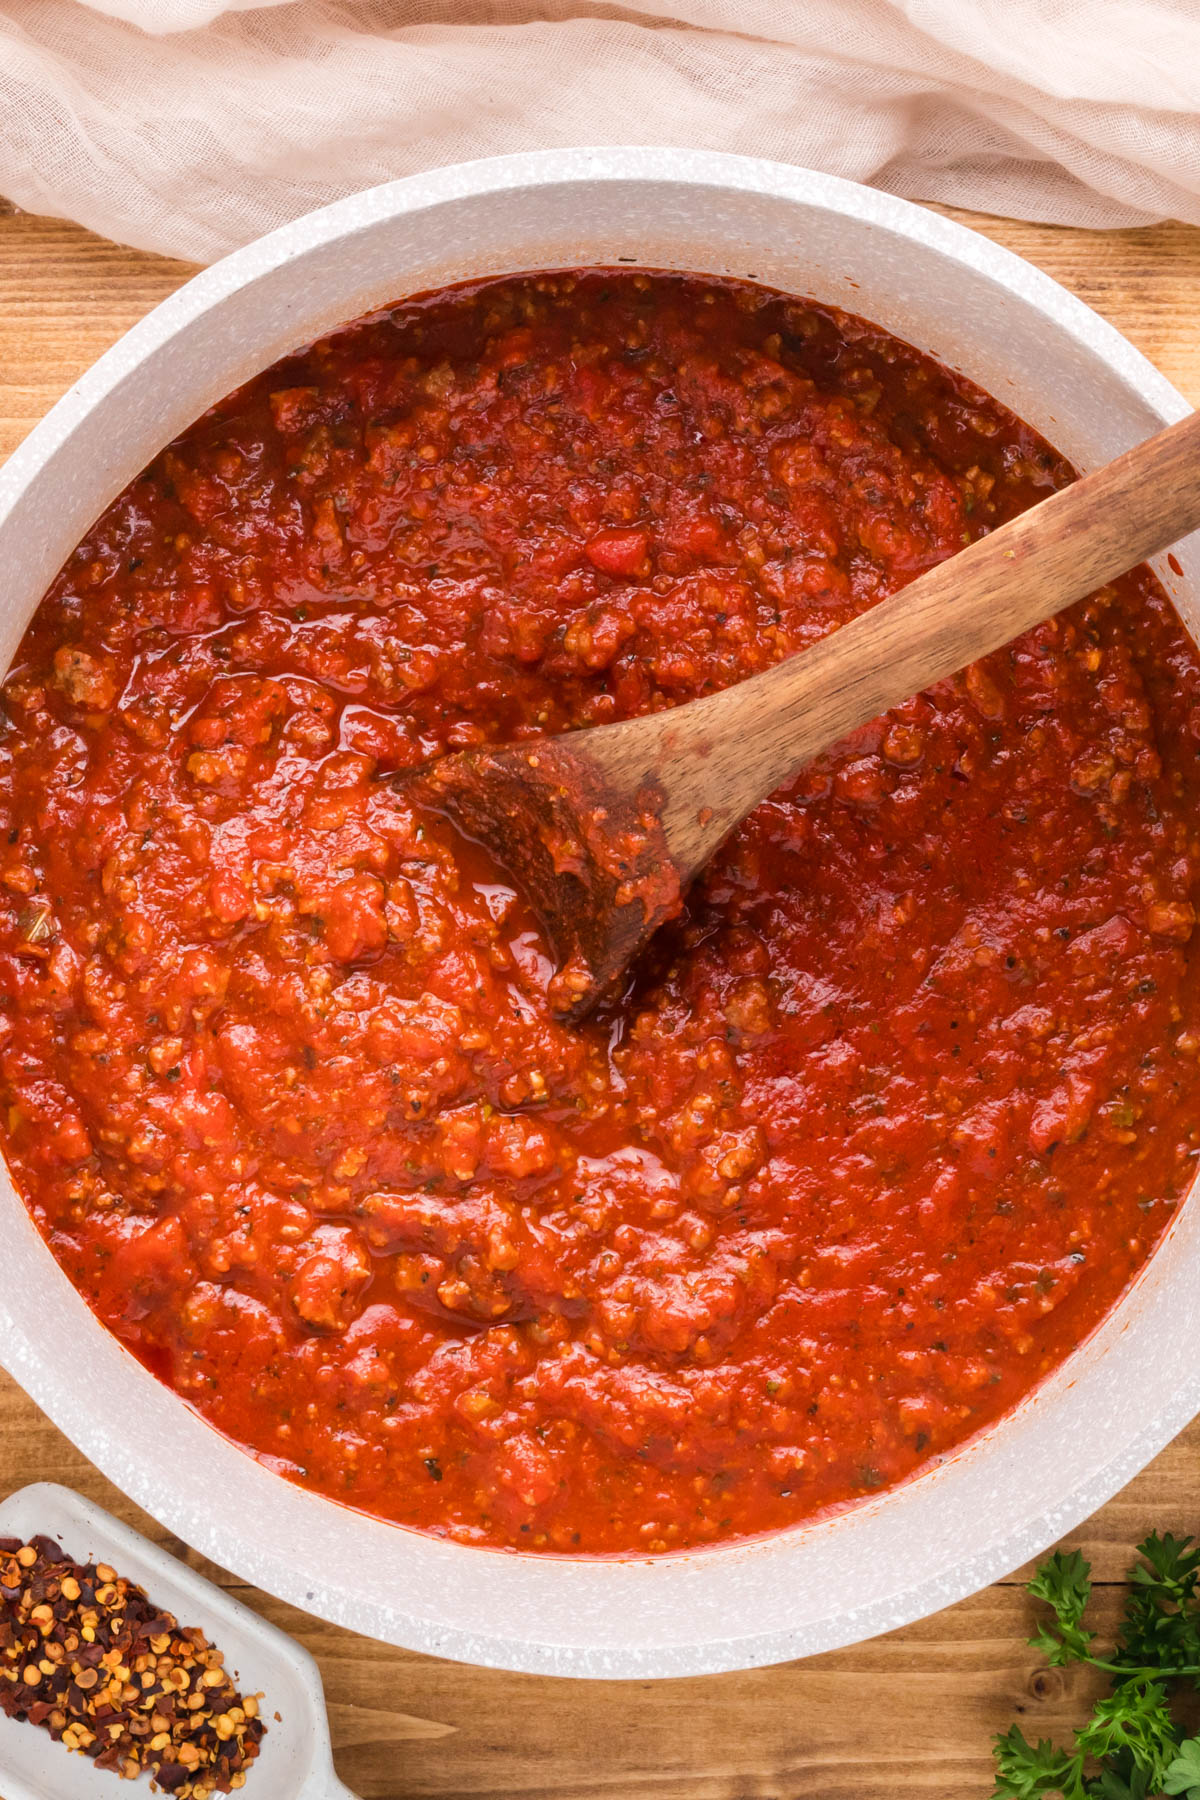 A close up image of meat sauce with a spoon in it.